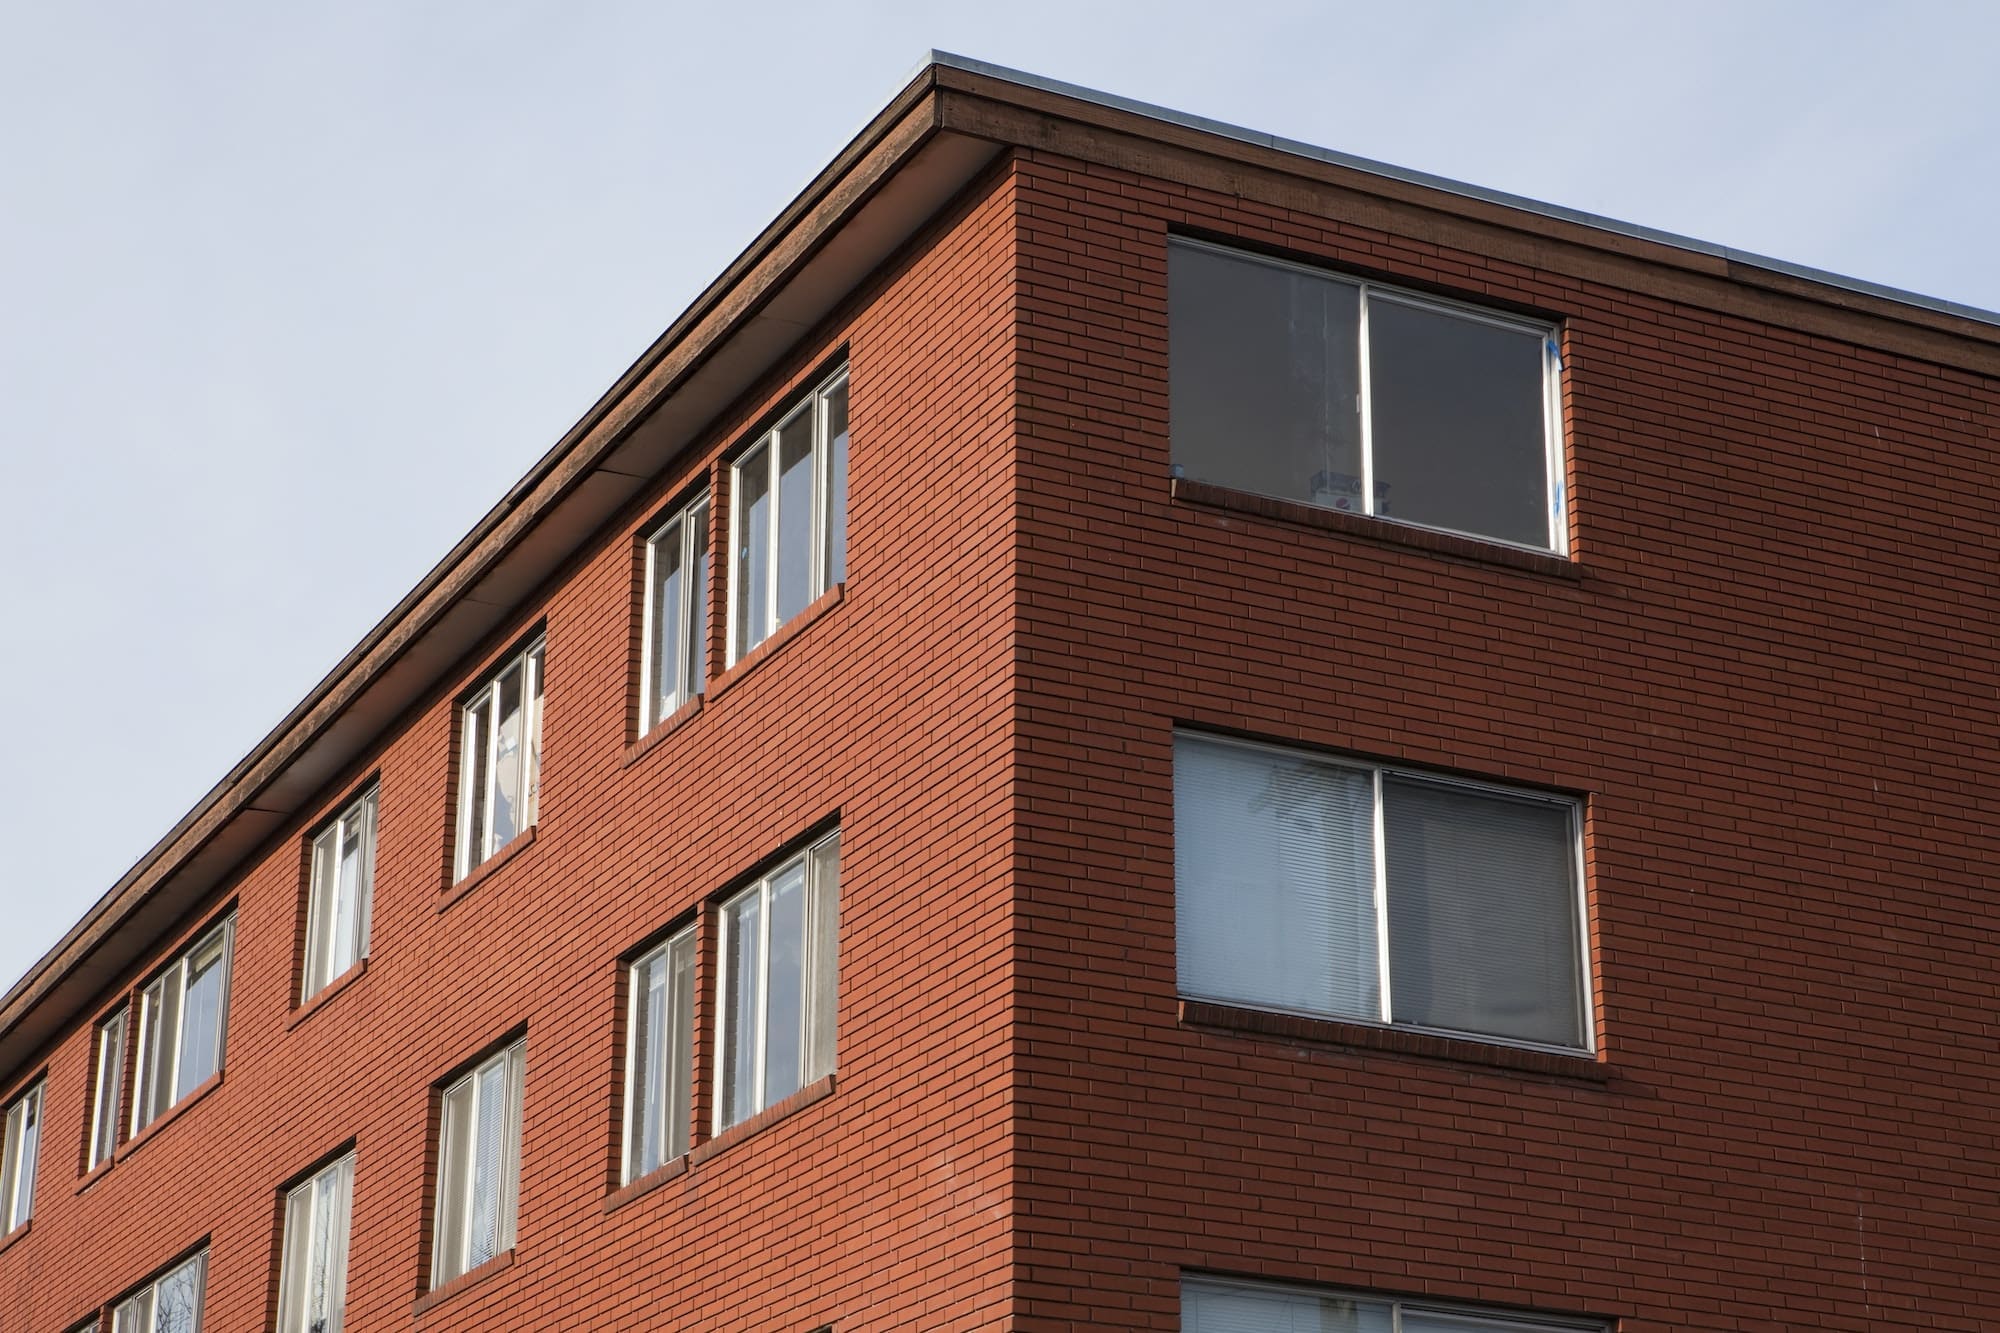 Corner of a building, low angle view, windows in rows, residential or commercial.